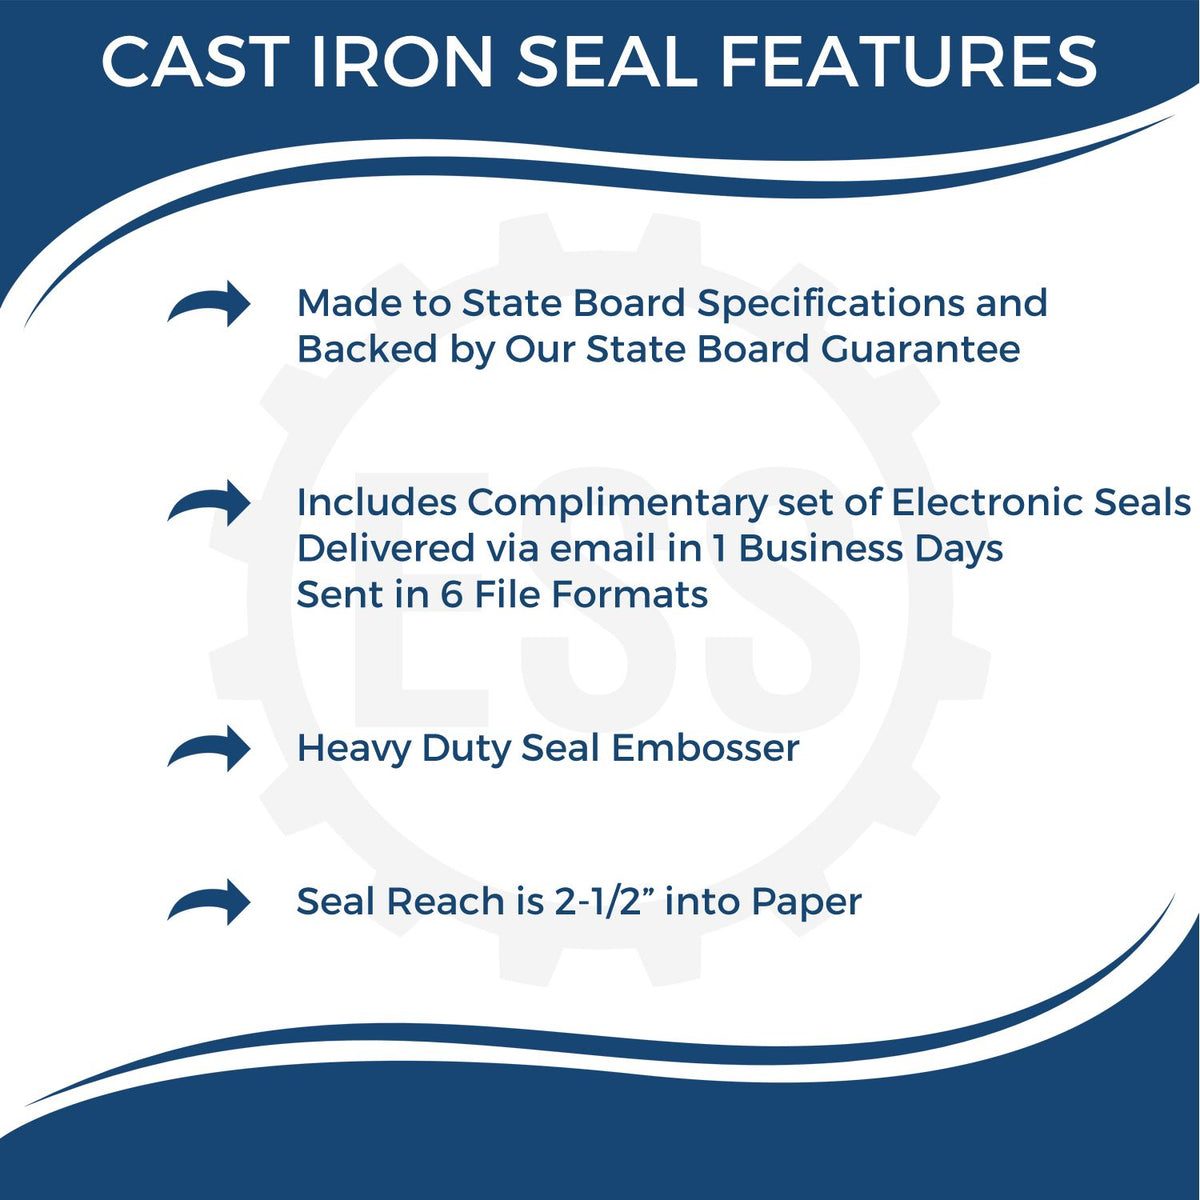 A picture of an infographic highlighting the selling points for the Heavy Duty Cast Iron Illinois Architect Embosser